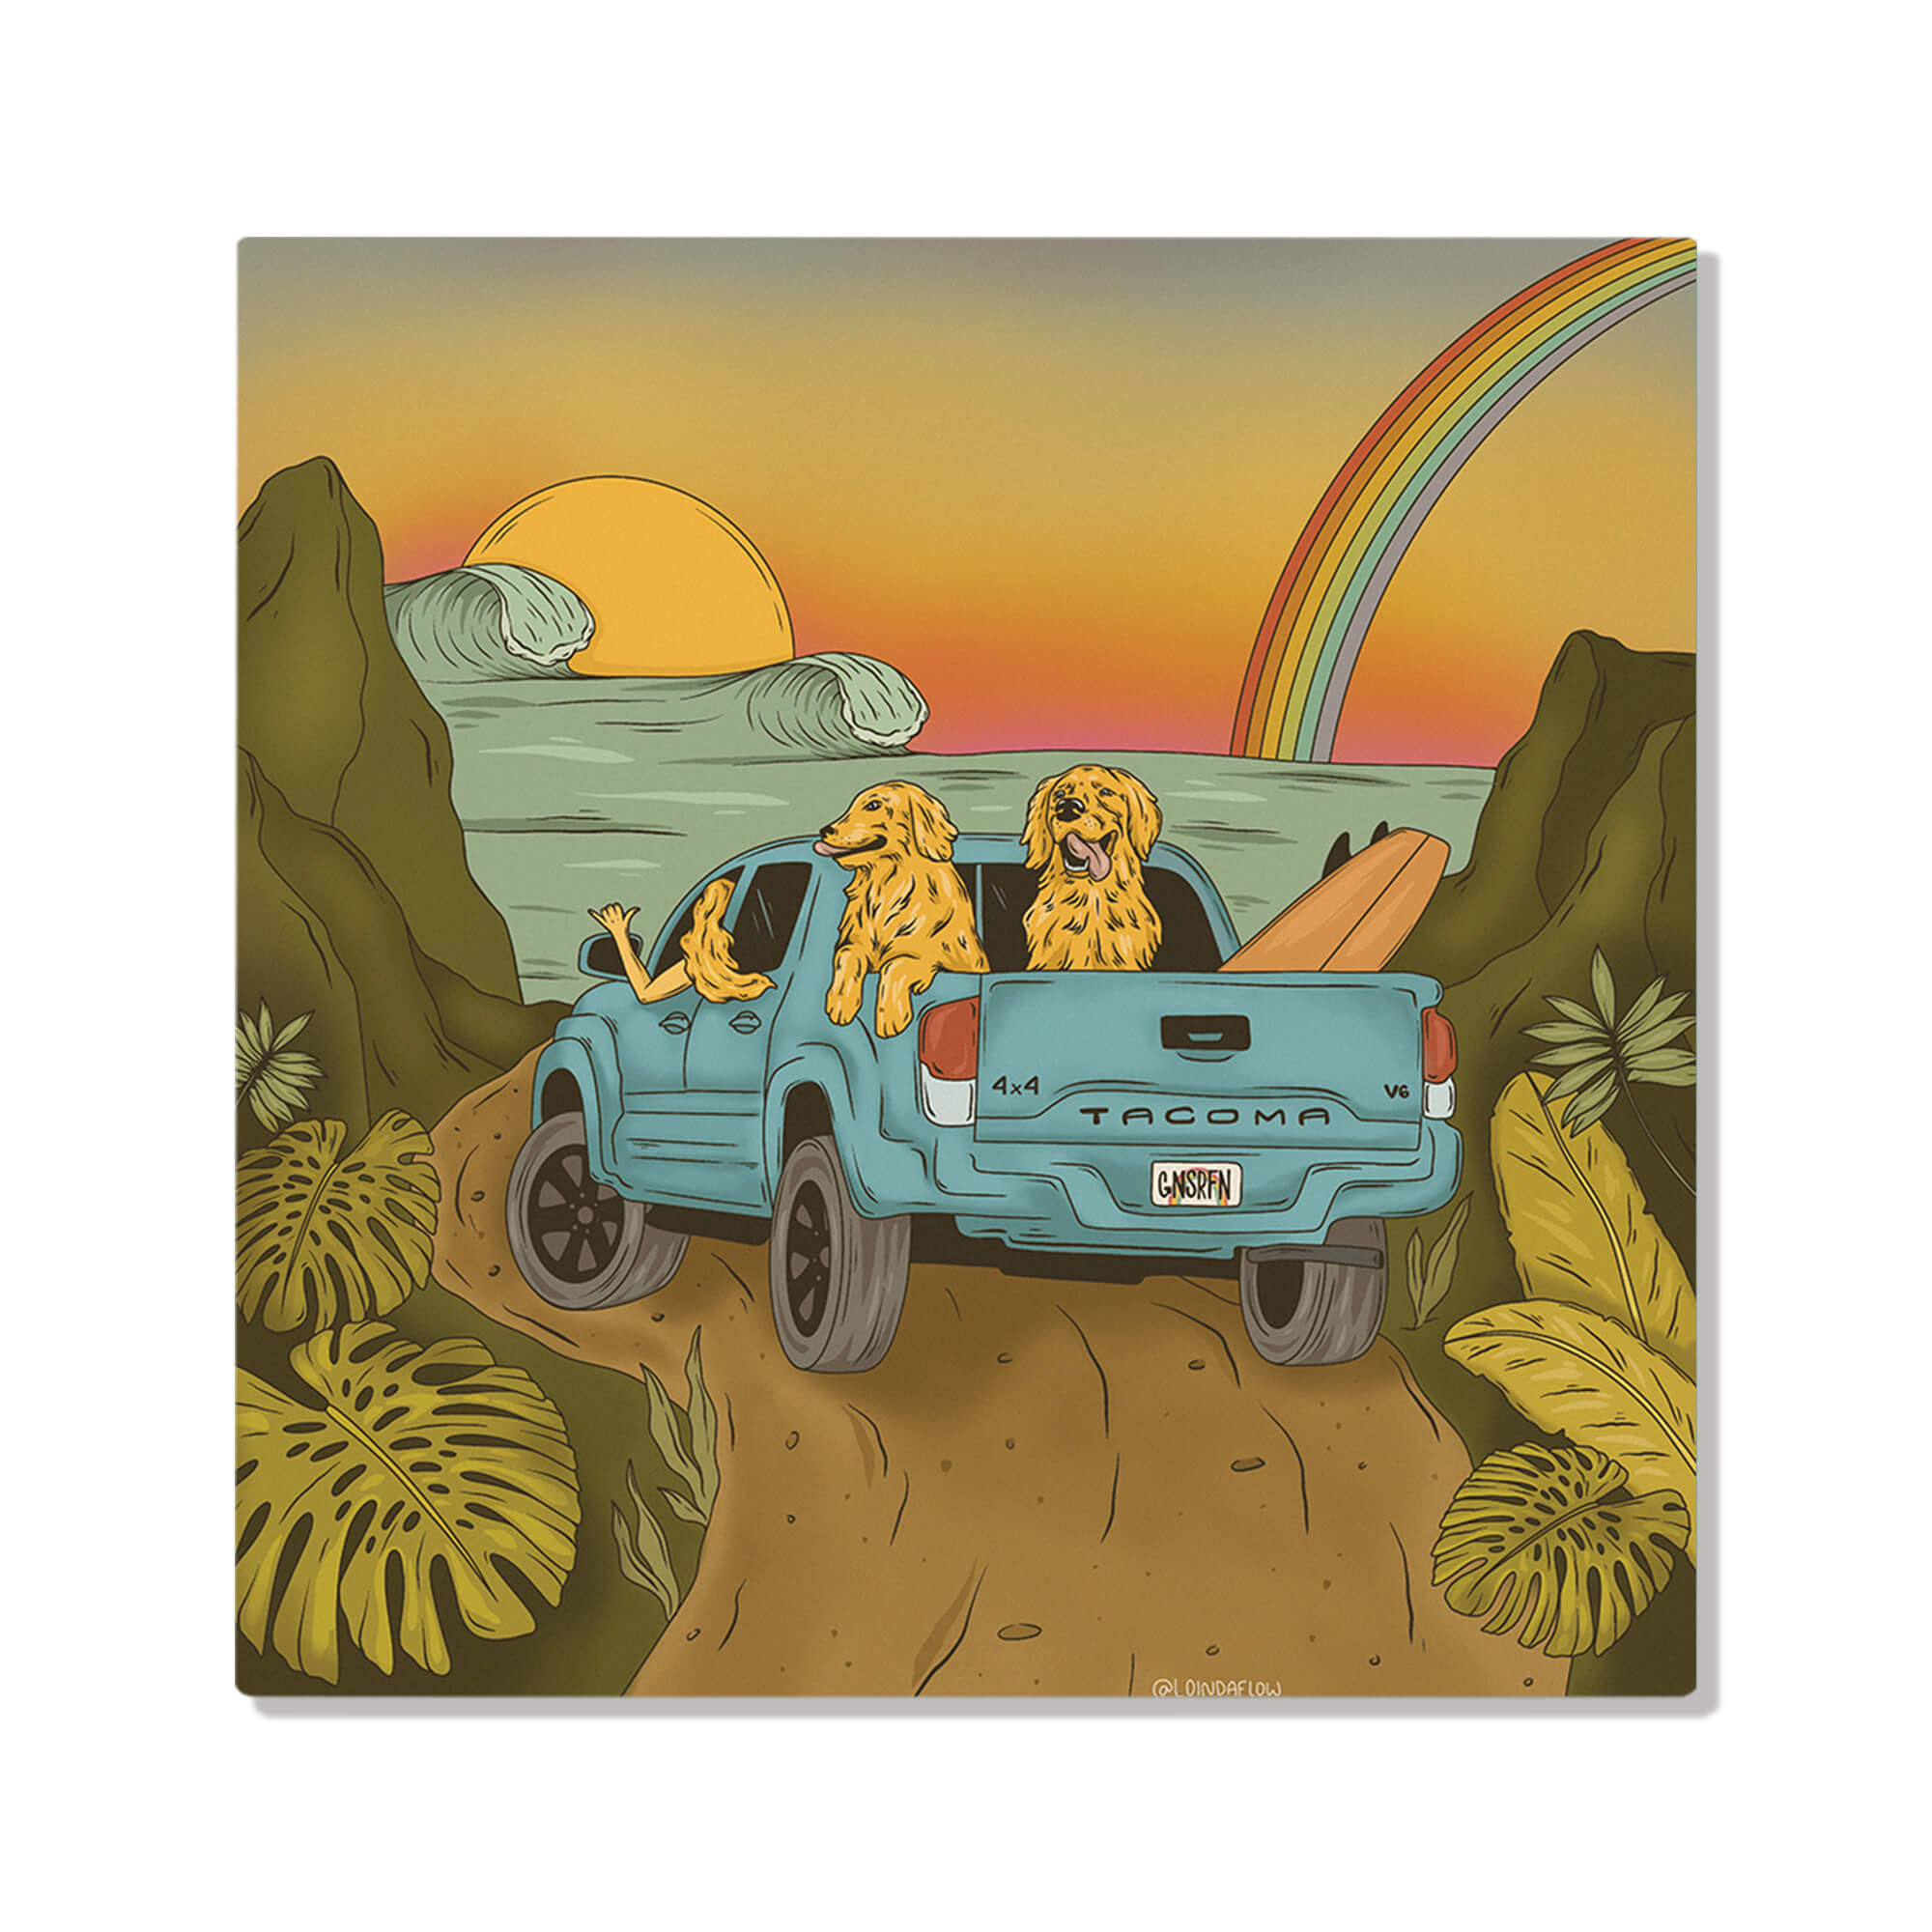 Metal art print featuring an illustration of a woman with her dogs and her surfboard heading towards the beach by Hawaii artist Laihha Organna